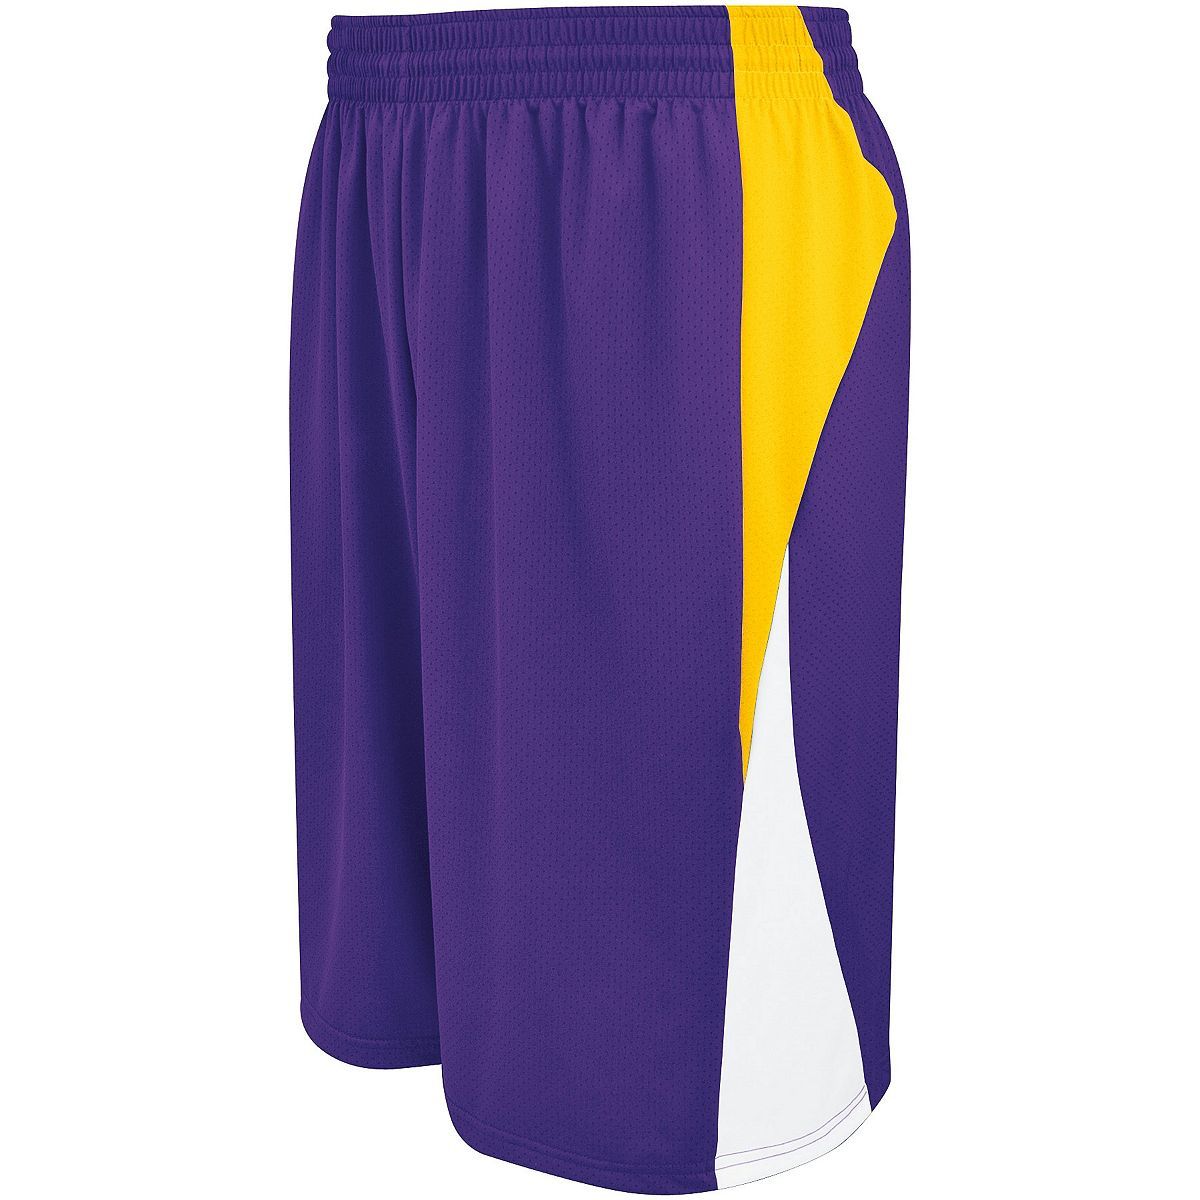 Holloway Campus Reversible Shorts in Purple/Athletic Gold/White  -Part of the Adult, Adult-Shorts, Basketball, Holloway, All-Sports, All-Sports-1 product lines at KanaleyCreations.com